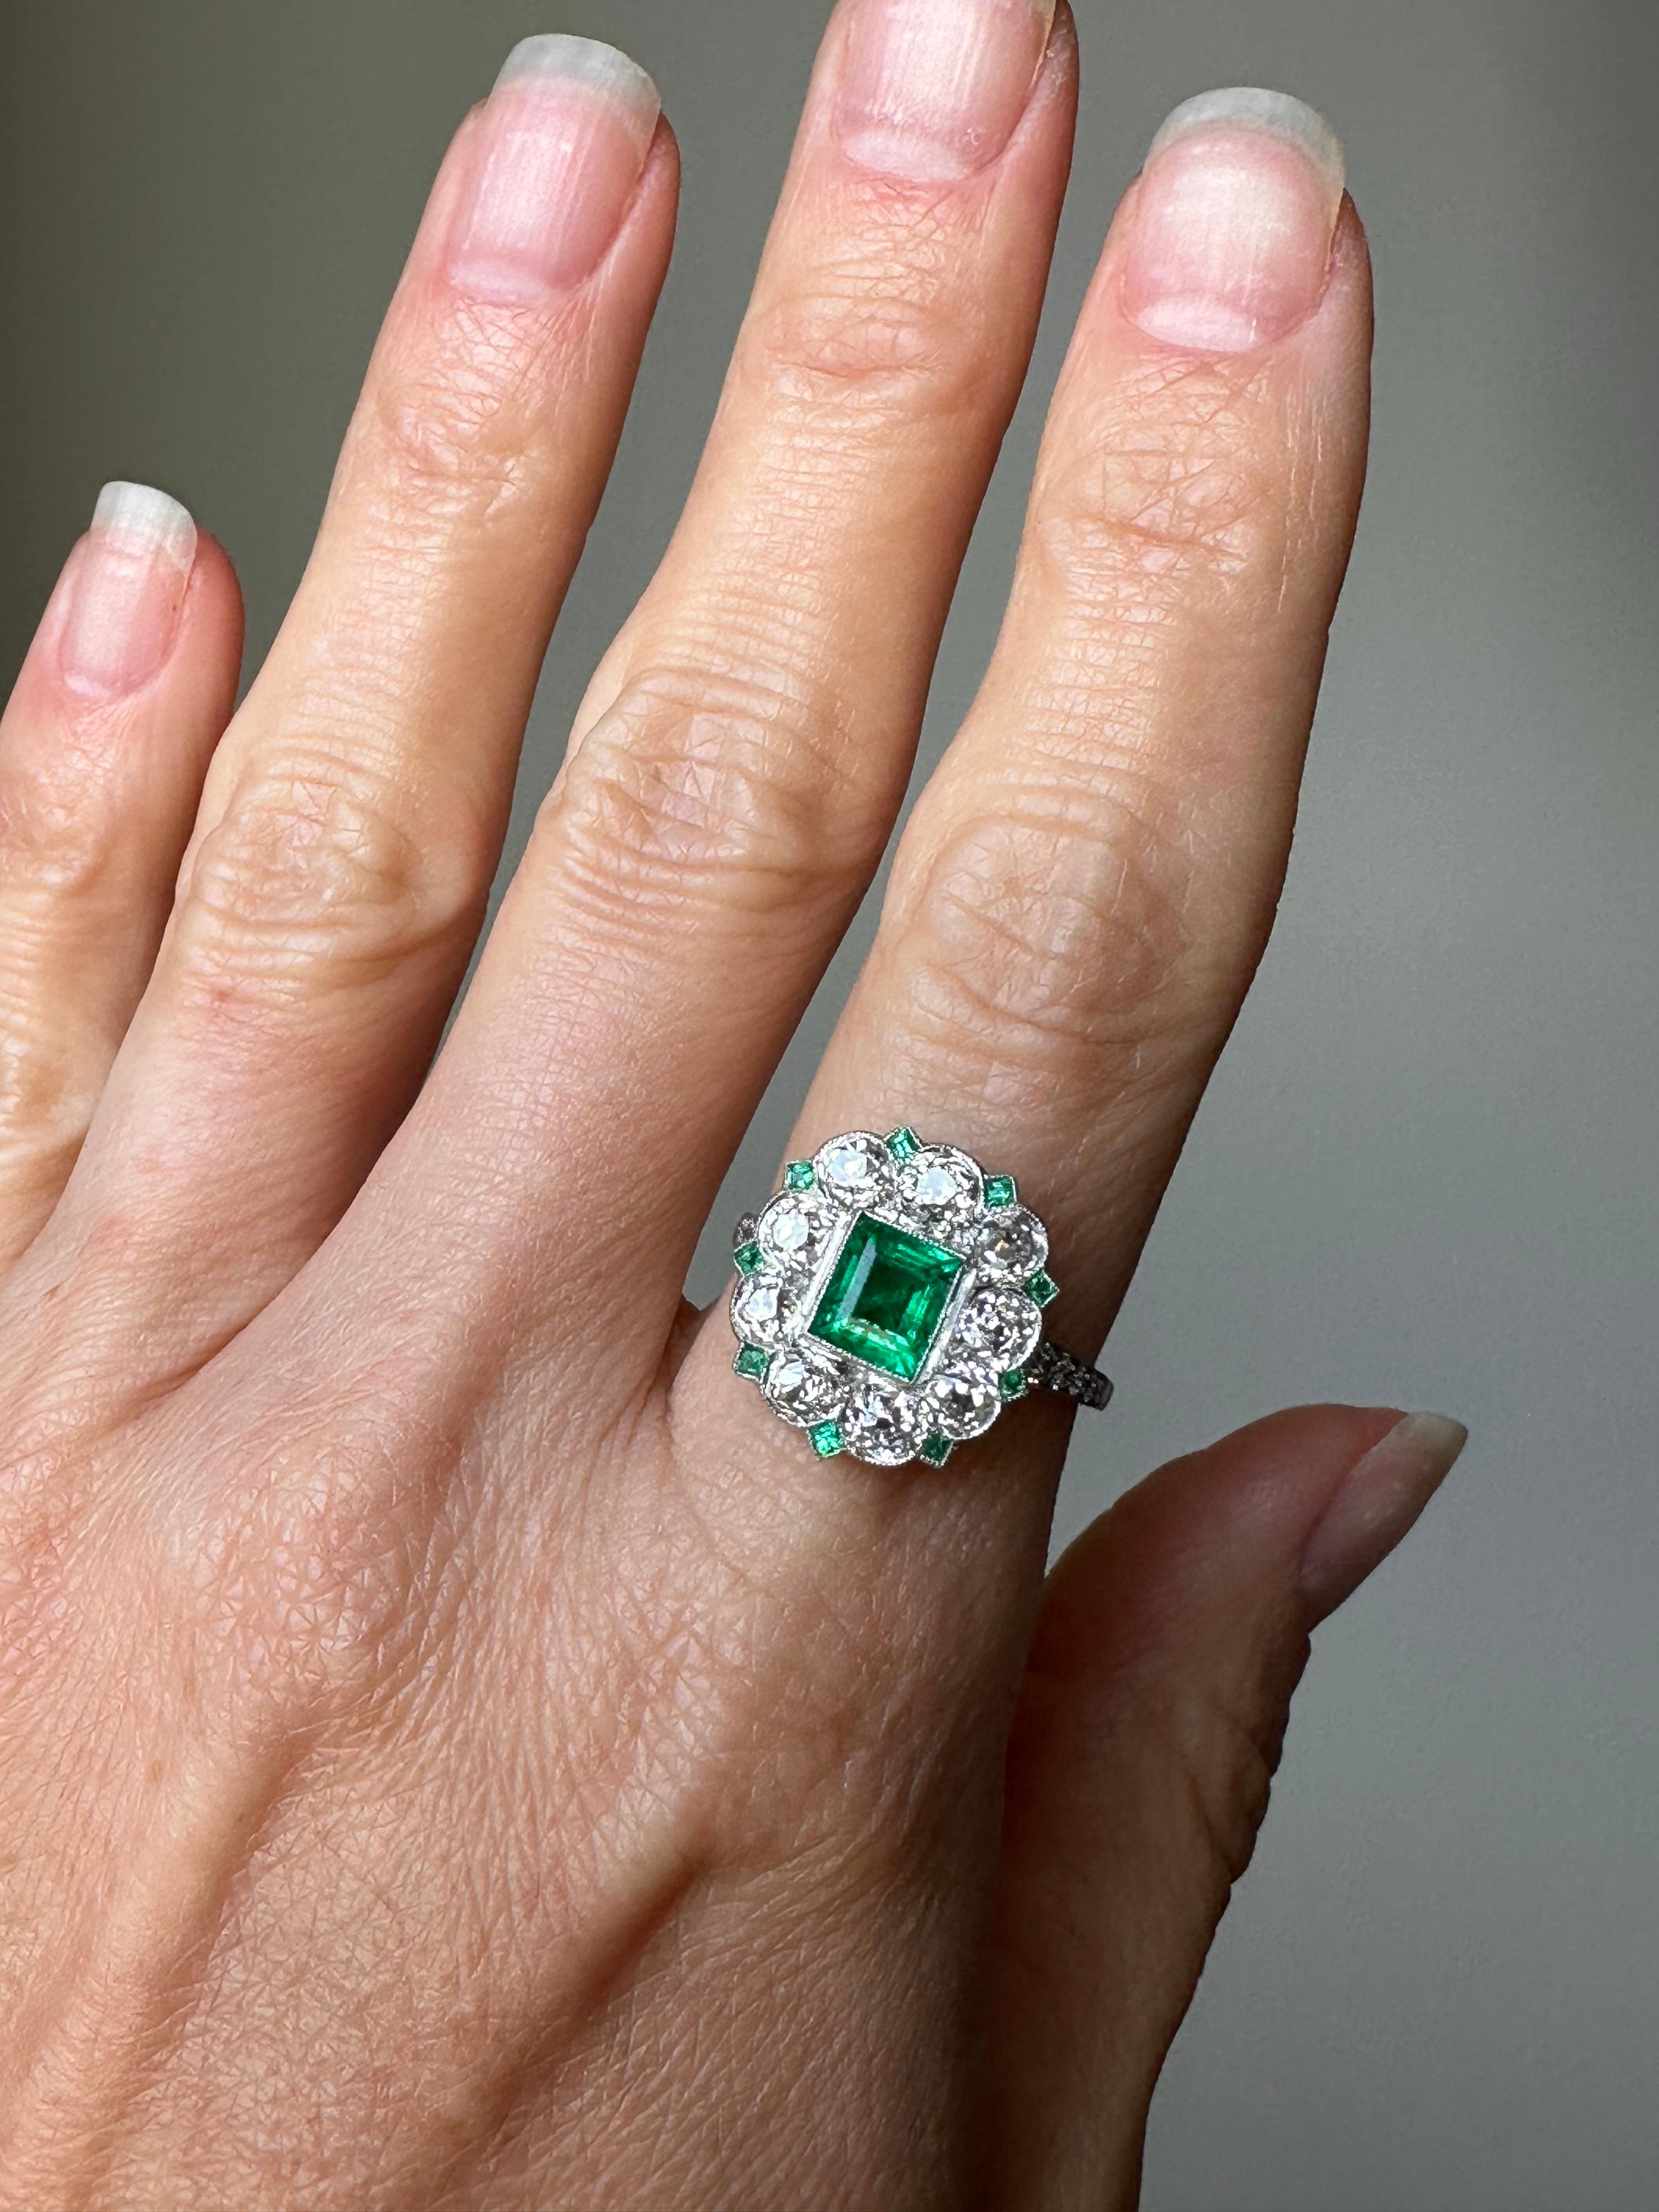 This ravishing Art Deco dinner ring centers on a richly saturated rectangular step-cut Colombian emerald that glows from within 2.3 carats of chunky old mine-cut diamonds interspersed by teeny tiny square step-cut emeralds set in platinum. This ring